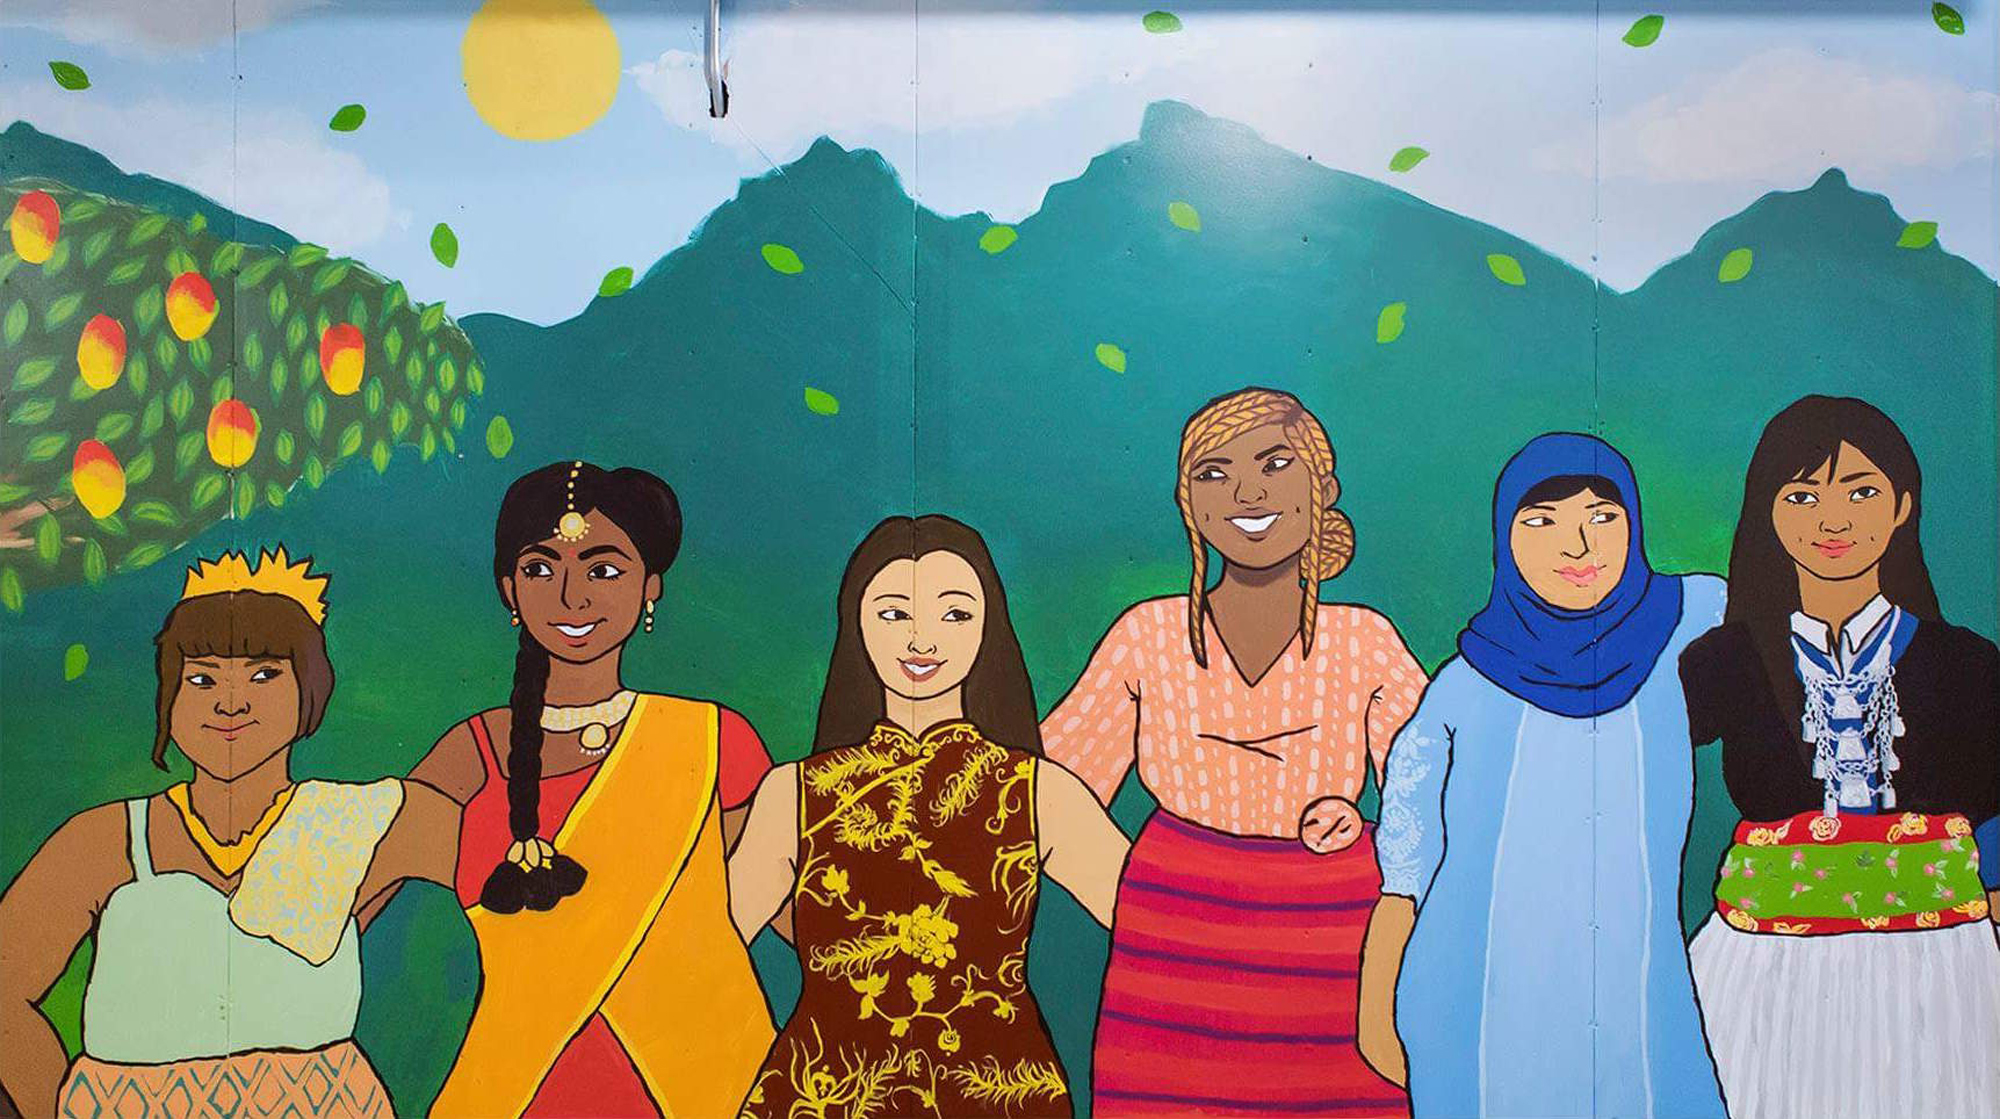 Mural painted by young artists